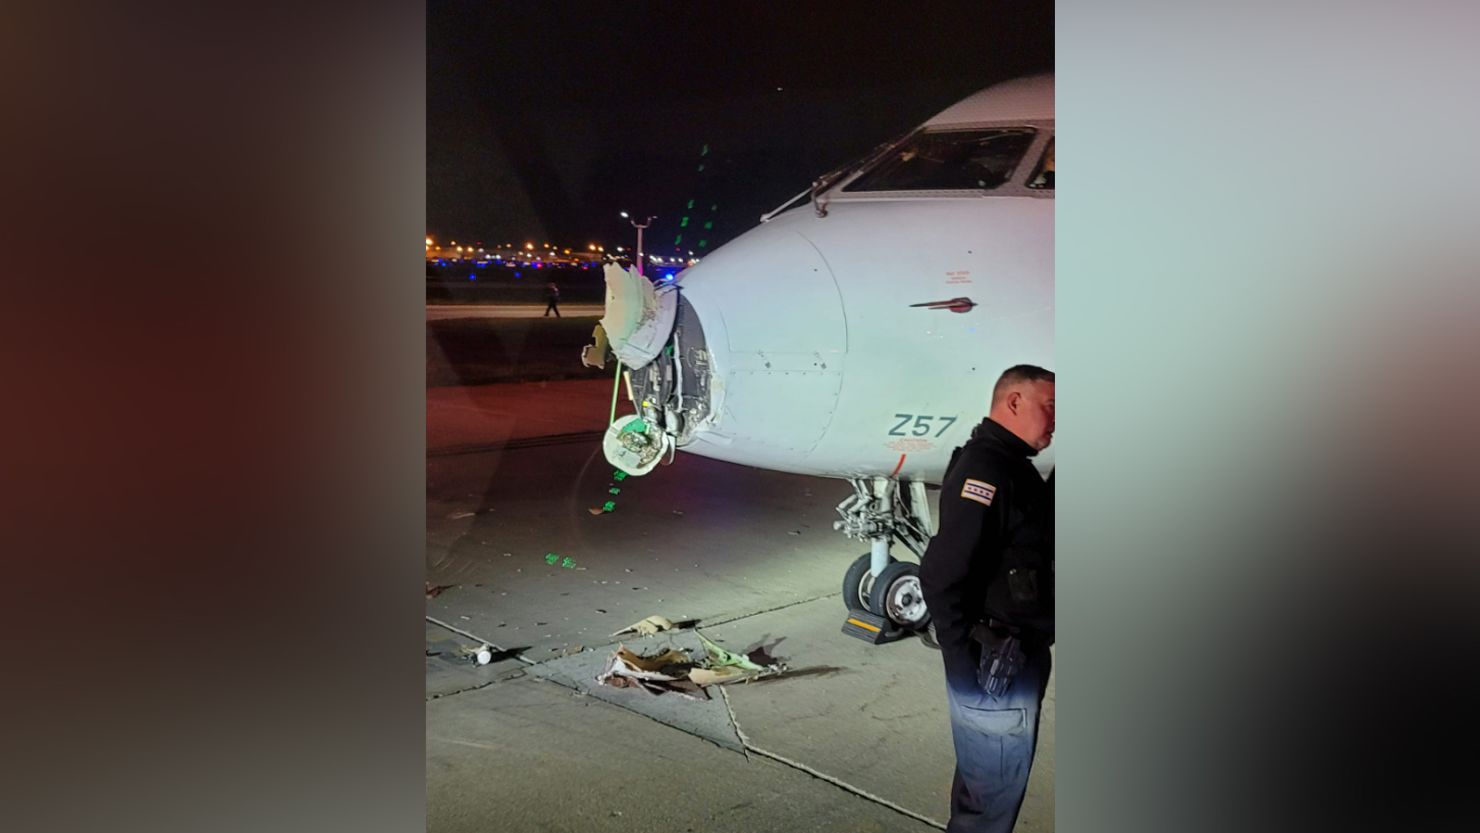 Damage to the nose of an aircraft is seen Friday night after the plane collided with a shuttle bus as the craft was taxiing at Chicago O'Hare International Airport.